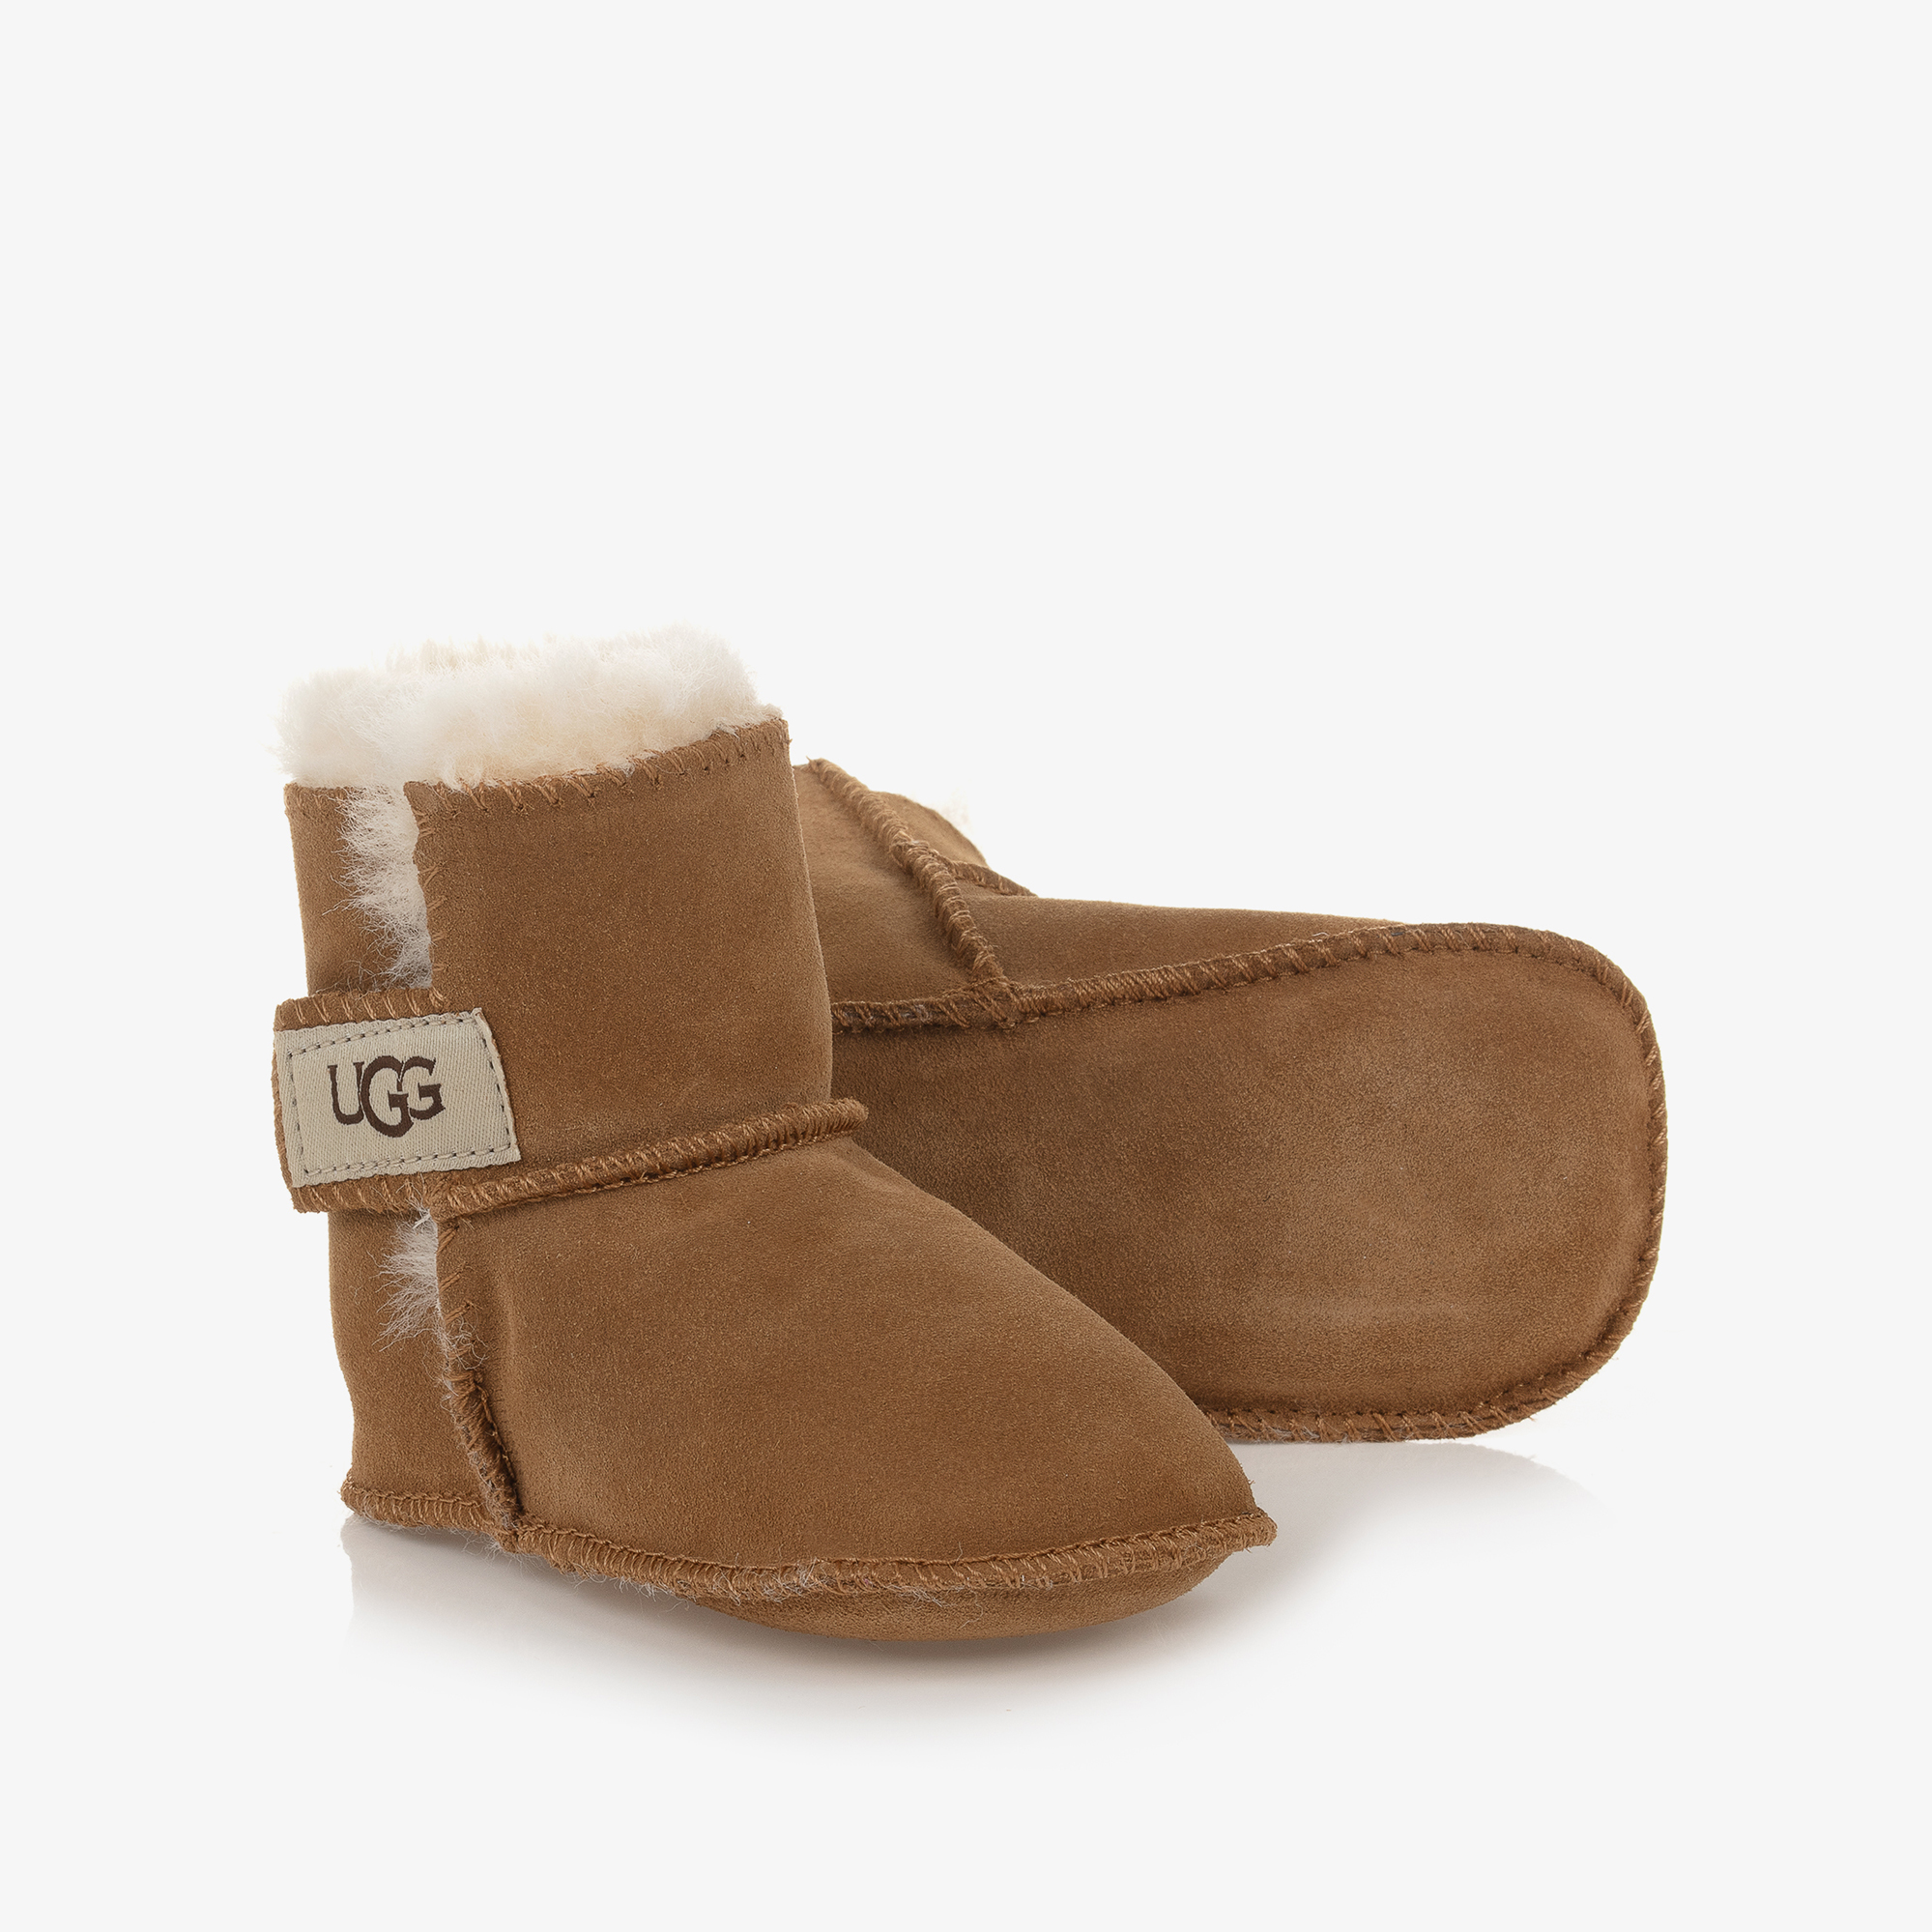 UGG Girls Suede Leather Bow Boots Wool Girls Kids USA 12 / UK 11 Brown by Childrensalon